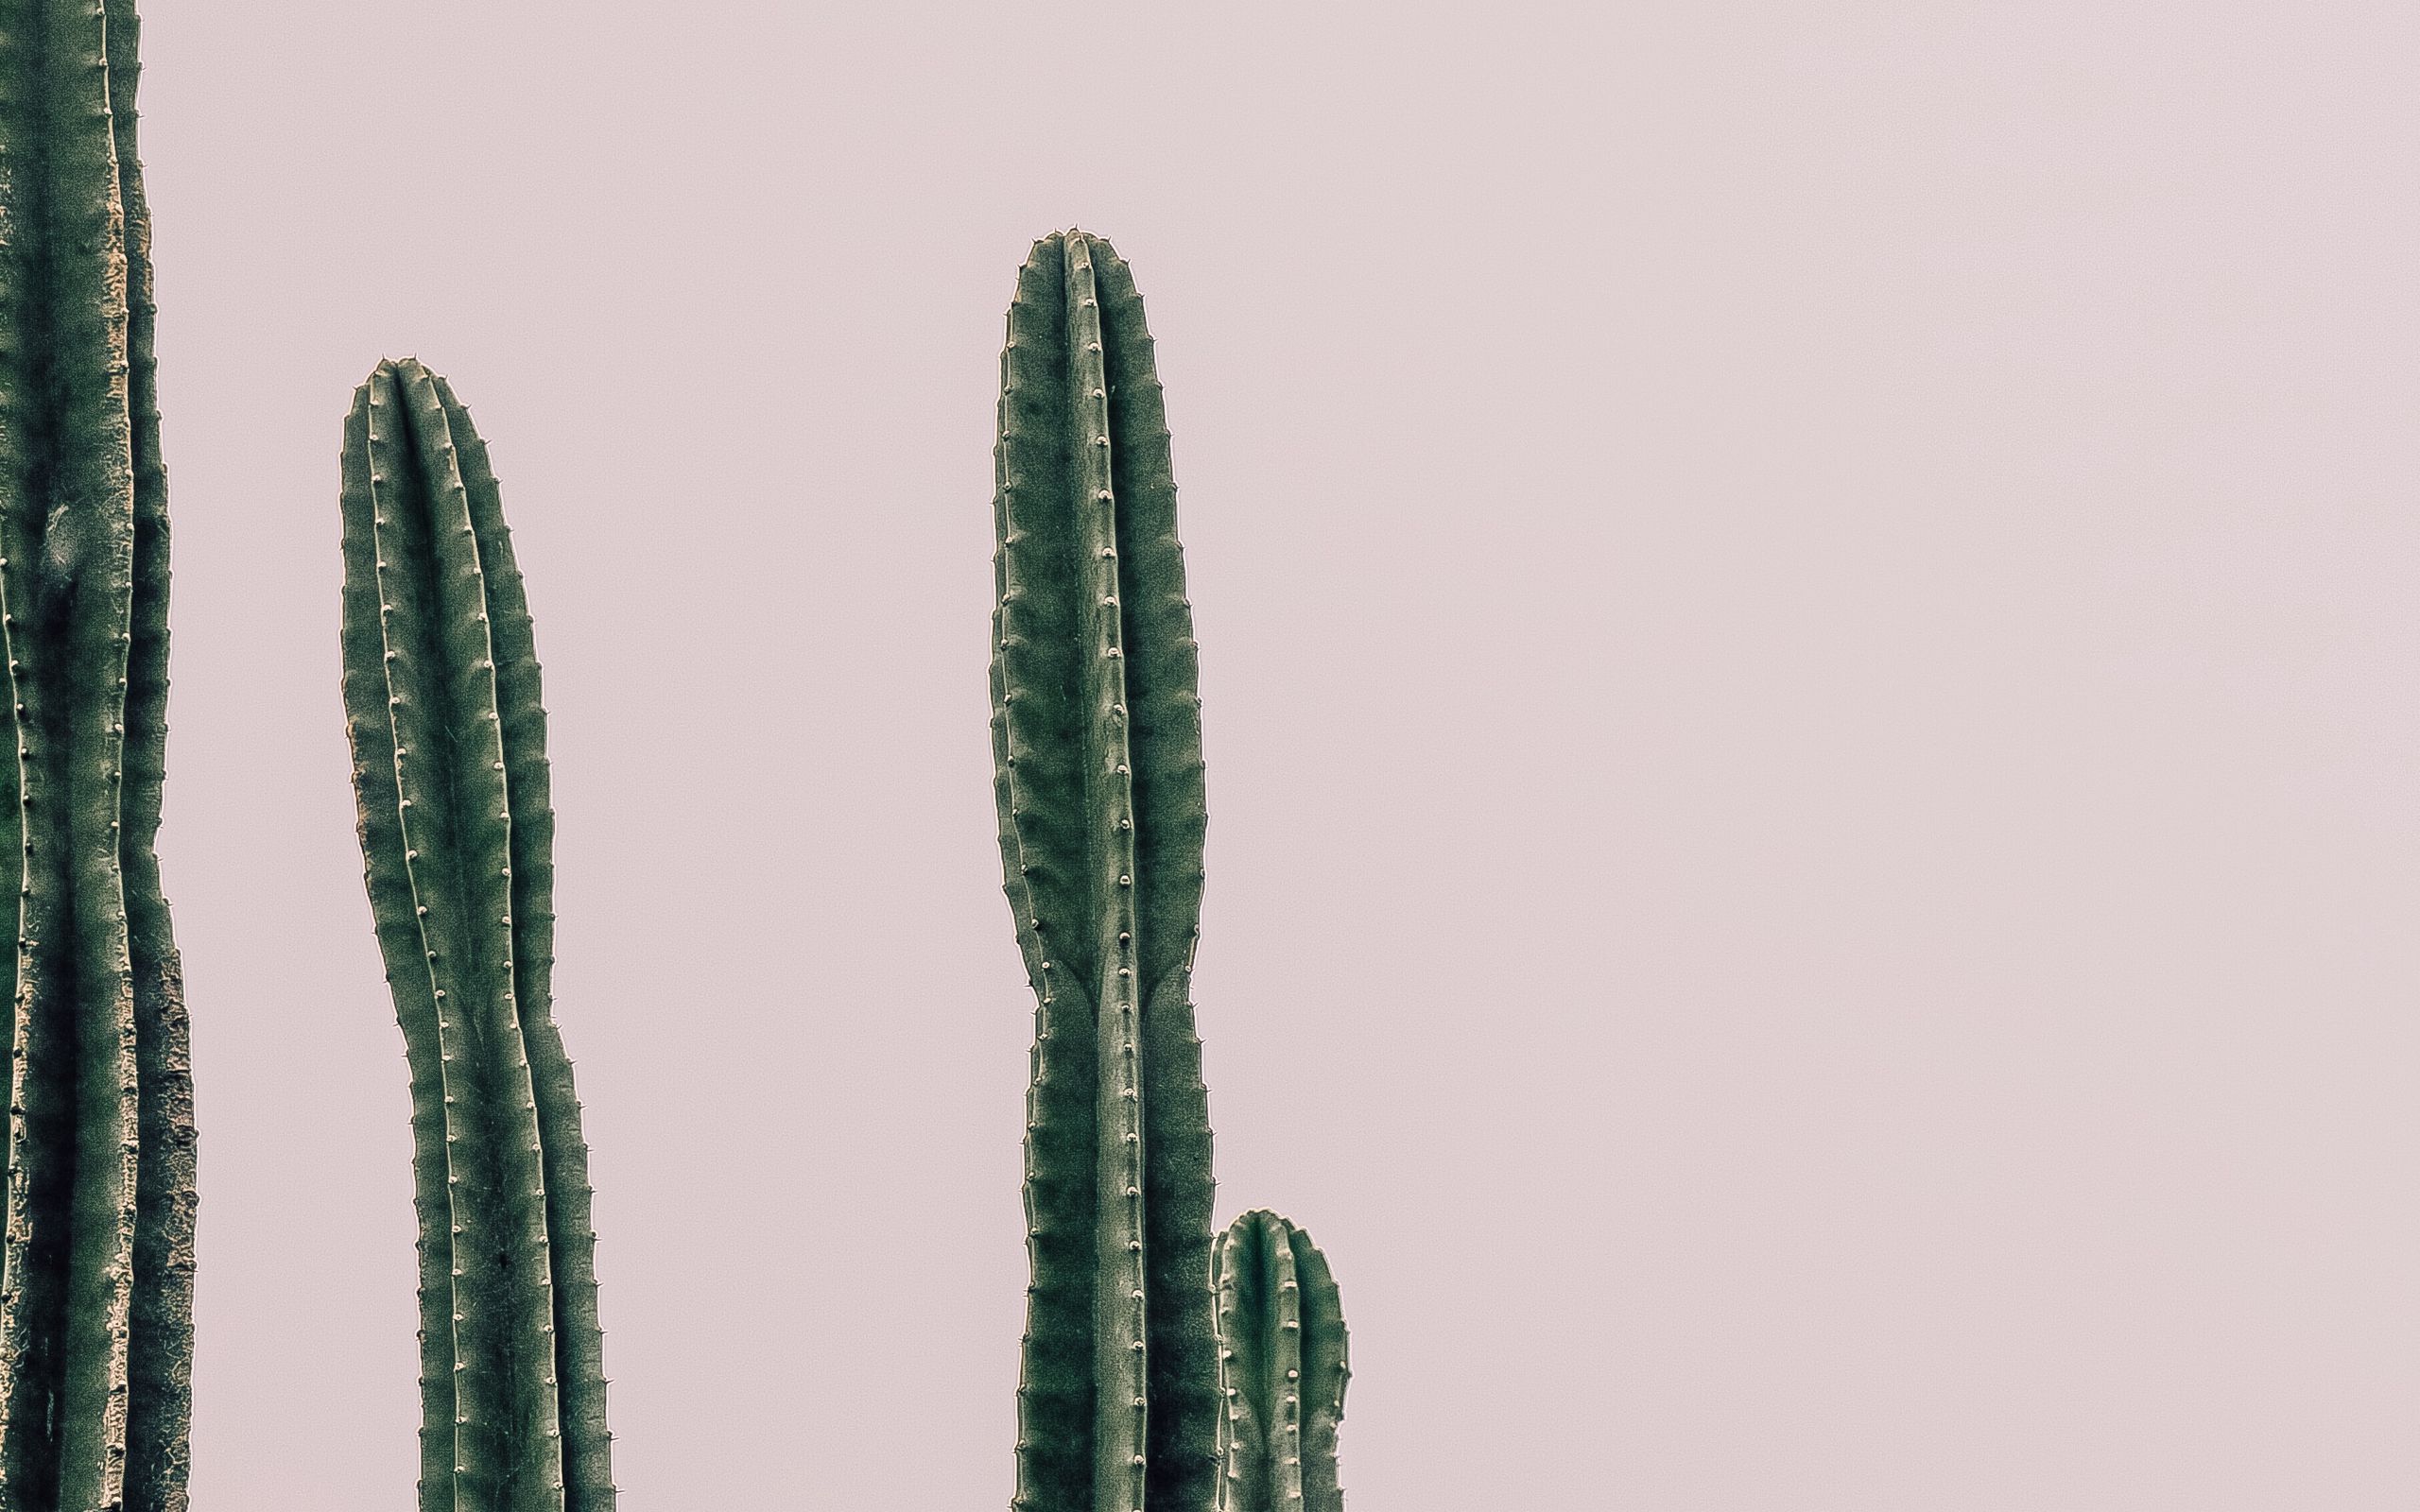 Download wallpaper 2560x1600 cactus, plant, prickly, minimalism widescreen  16:10 hd background